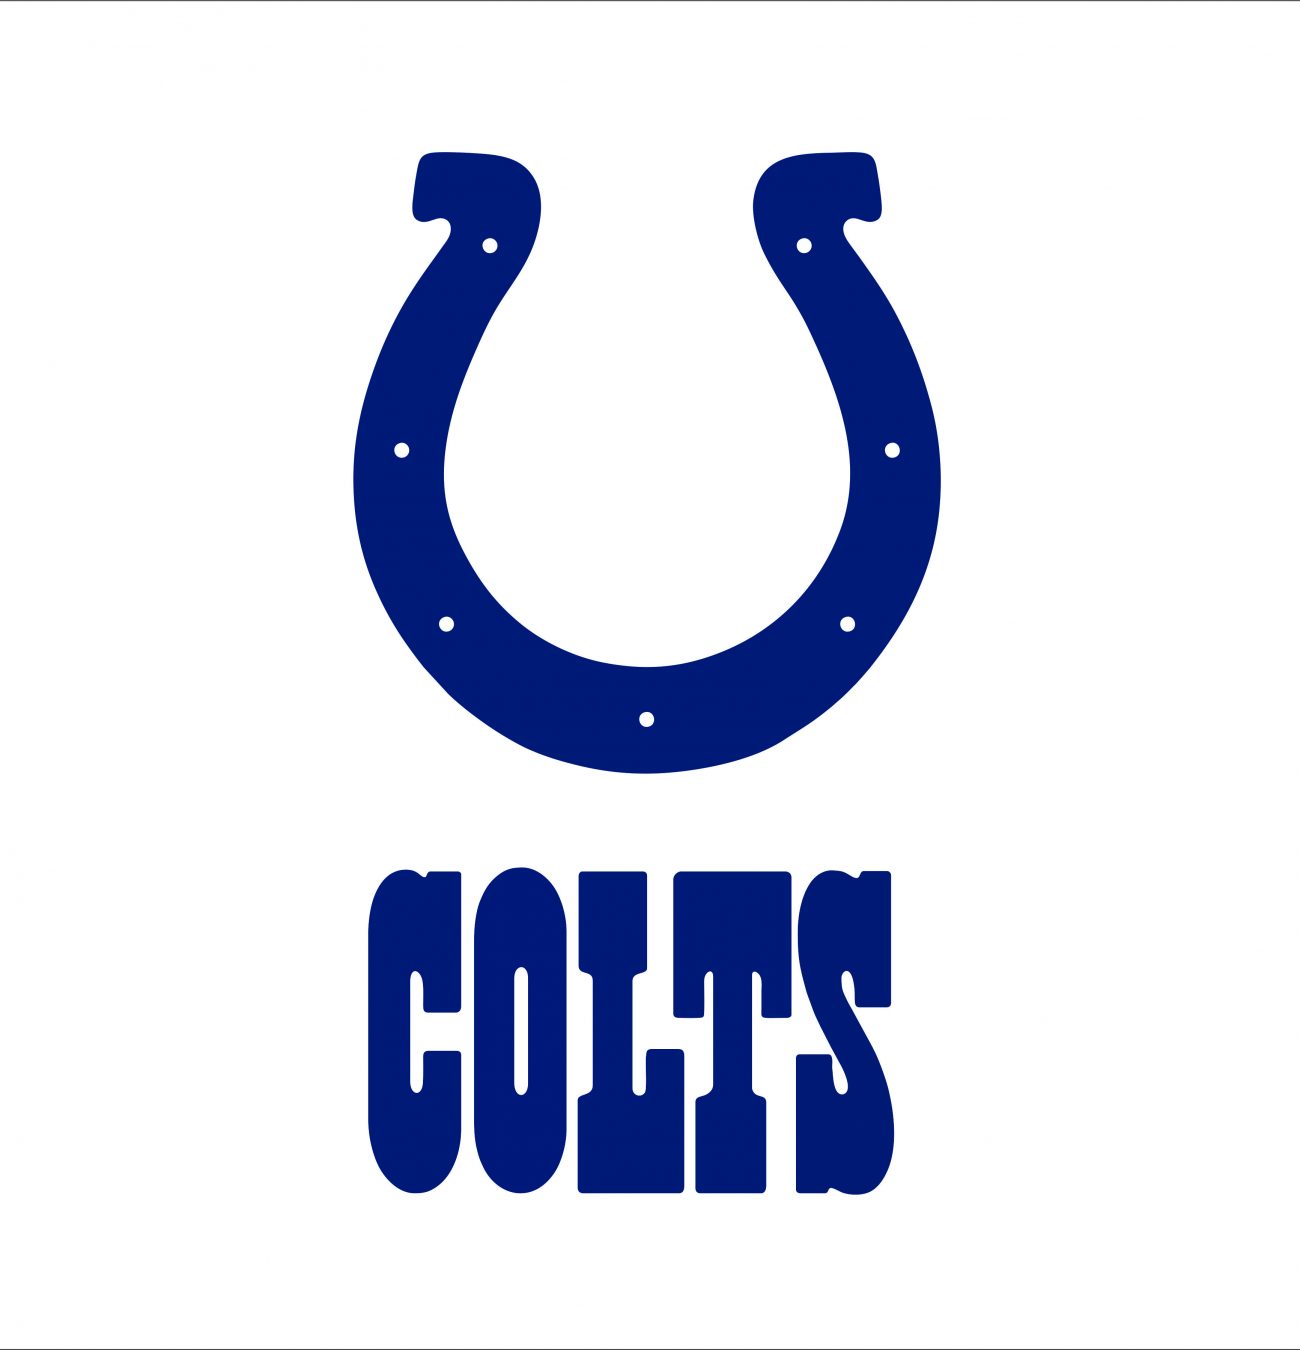 Indianapolis Colts1